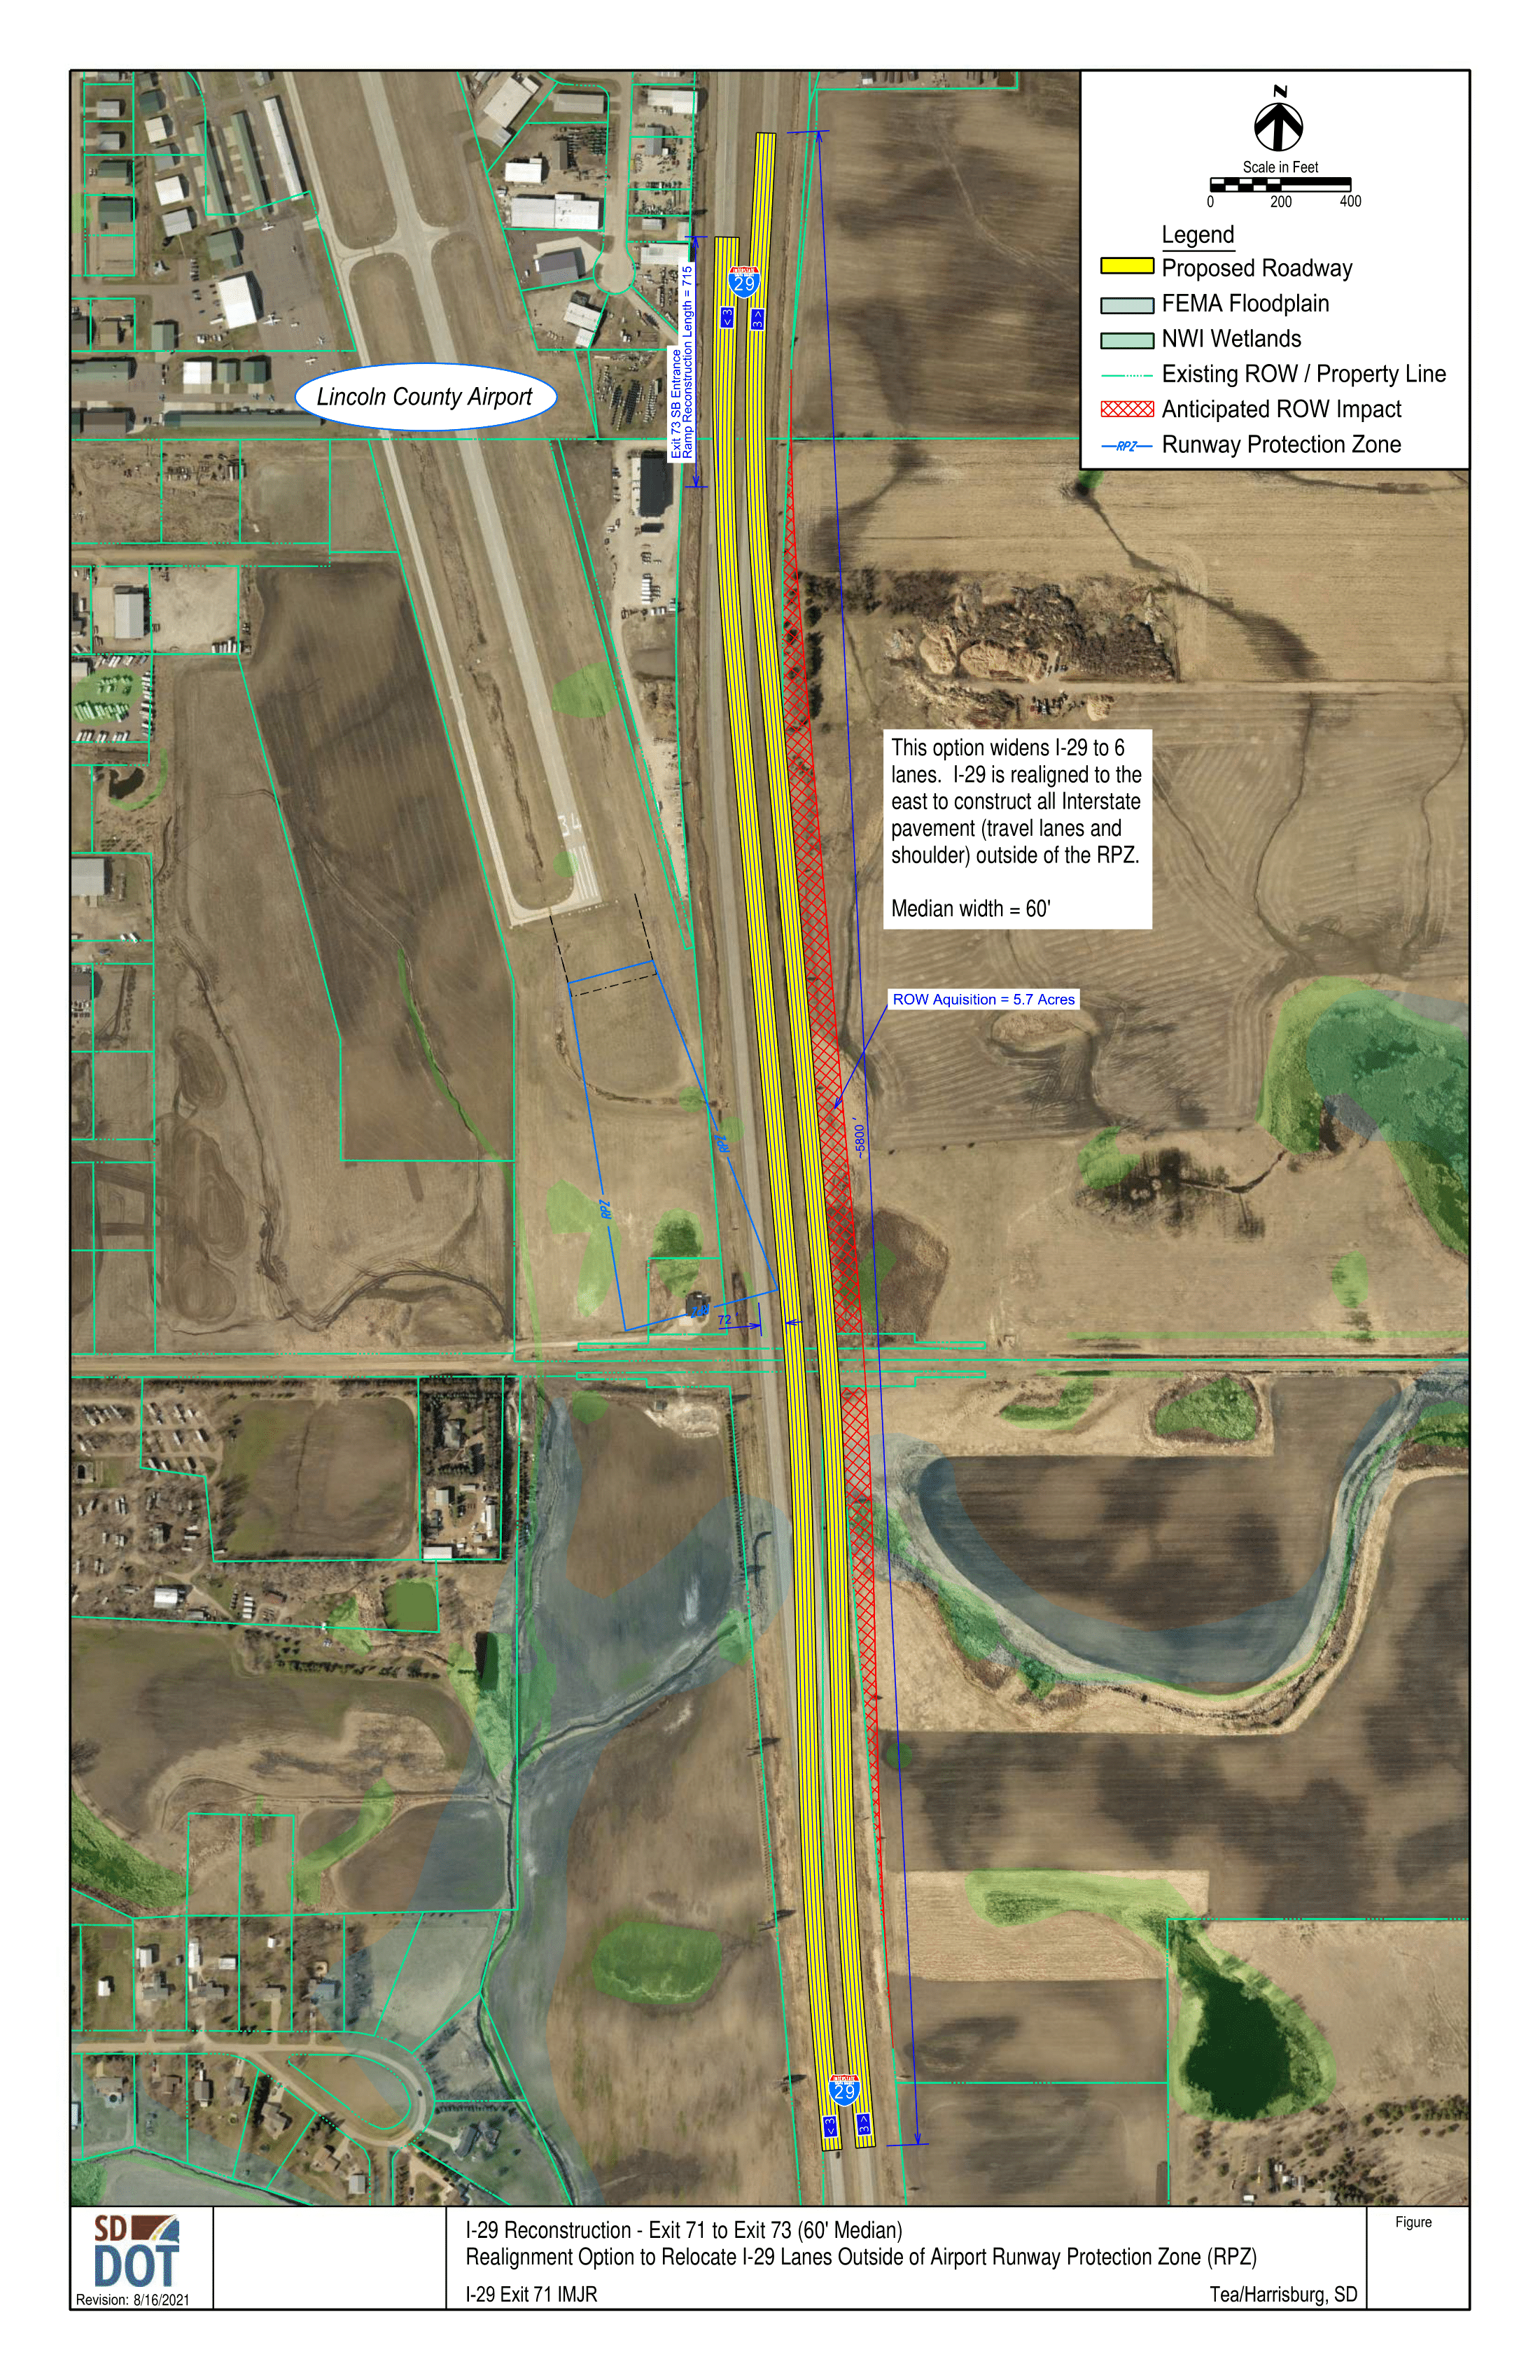 Image dipects relocating I-29 lanes Outside of Airport Runway Protection Zone.